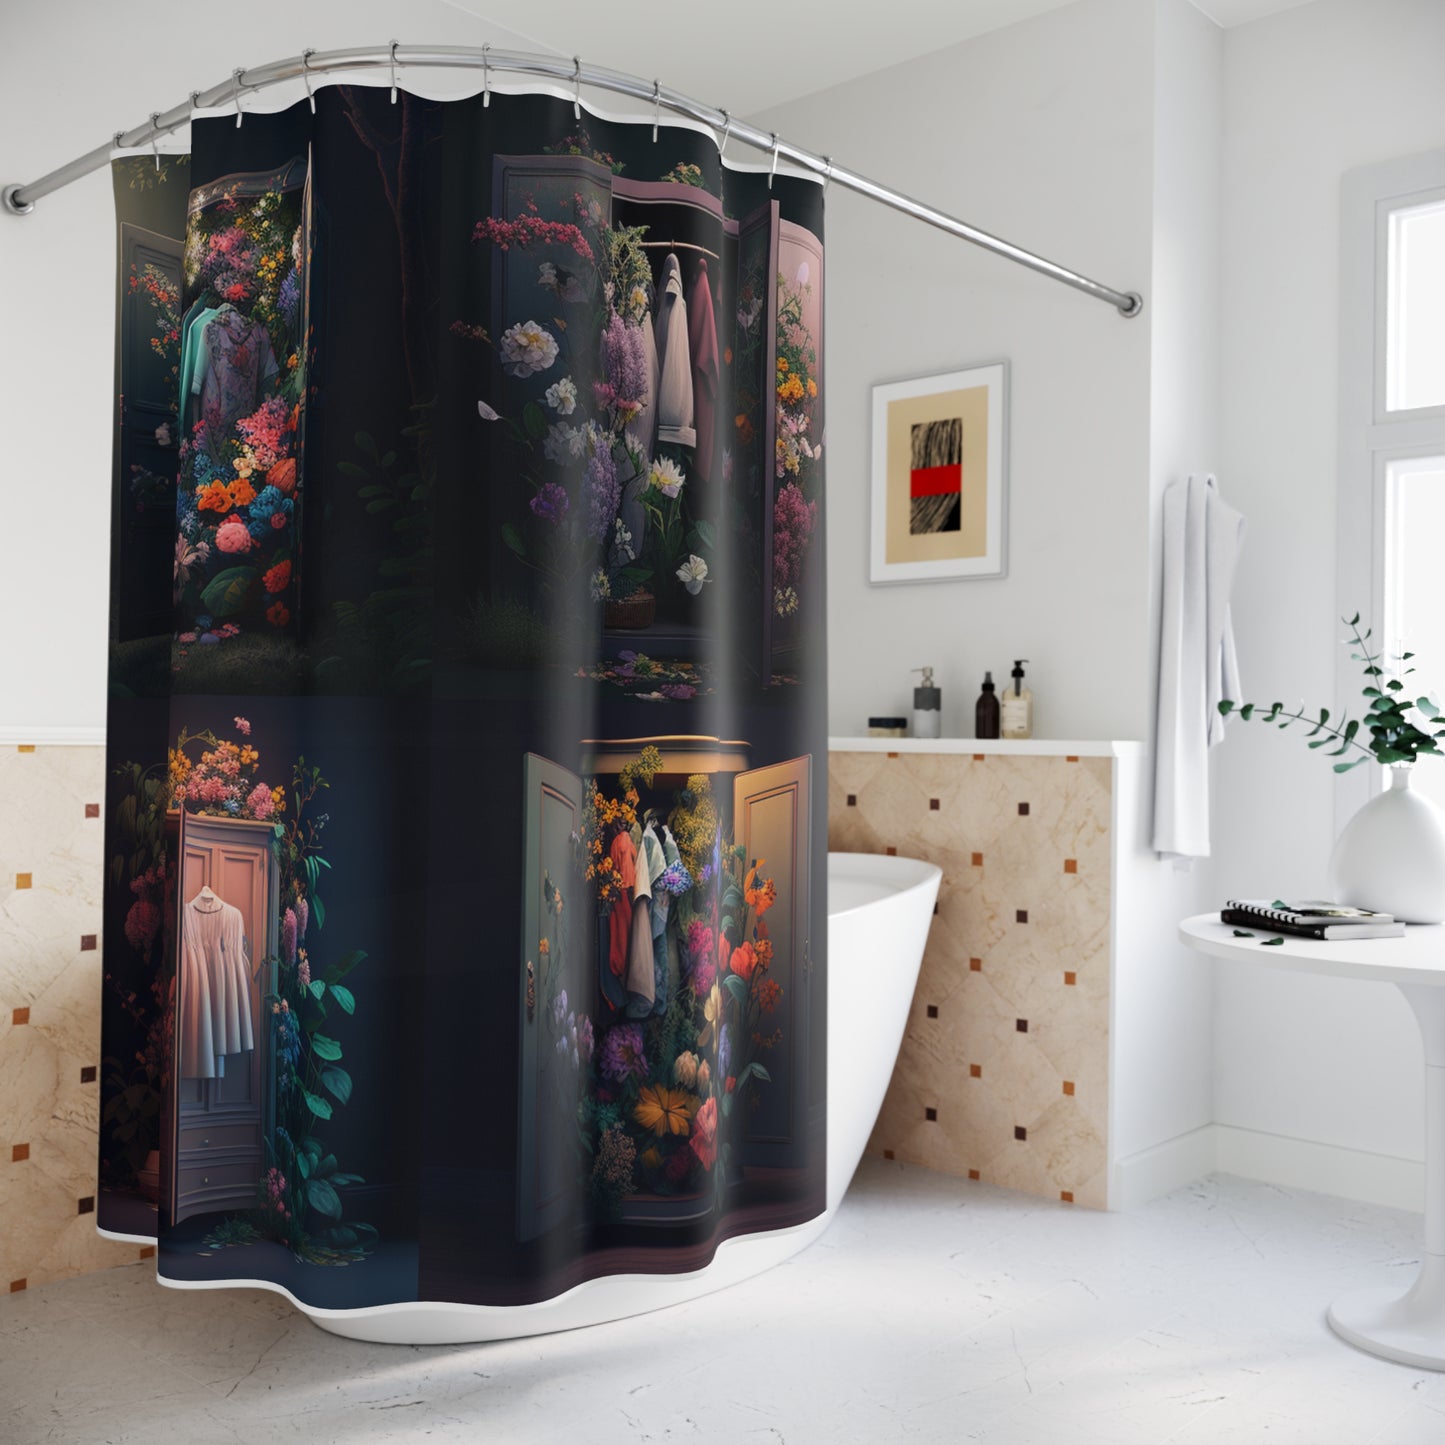 Polyester Shower Curtain A Wardrobe Surrounded by Flowers 5